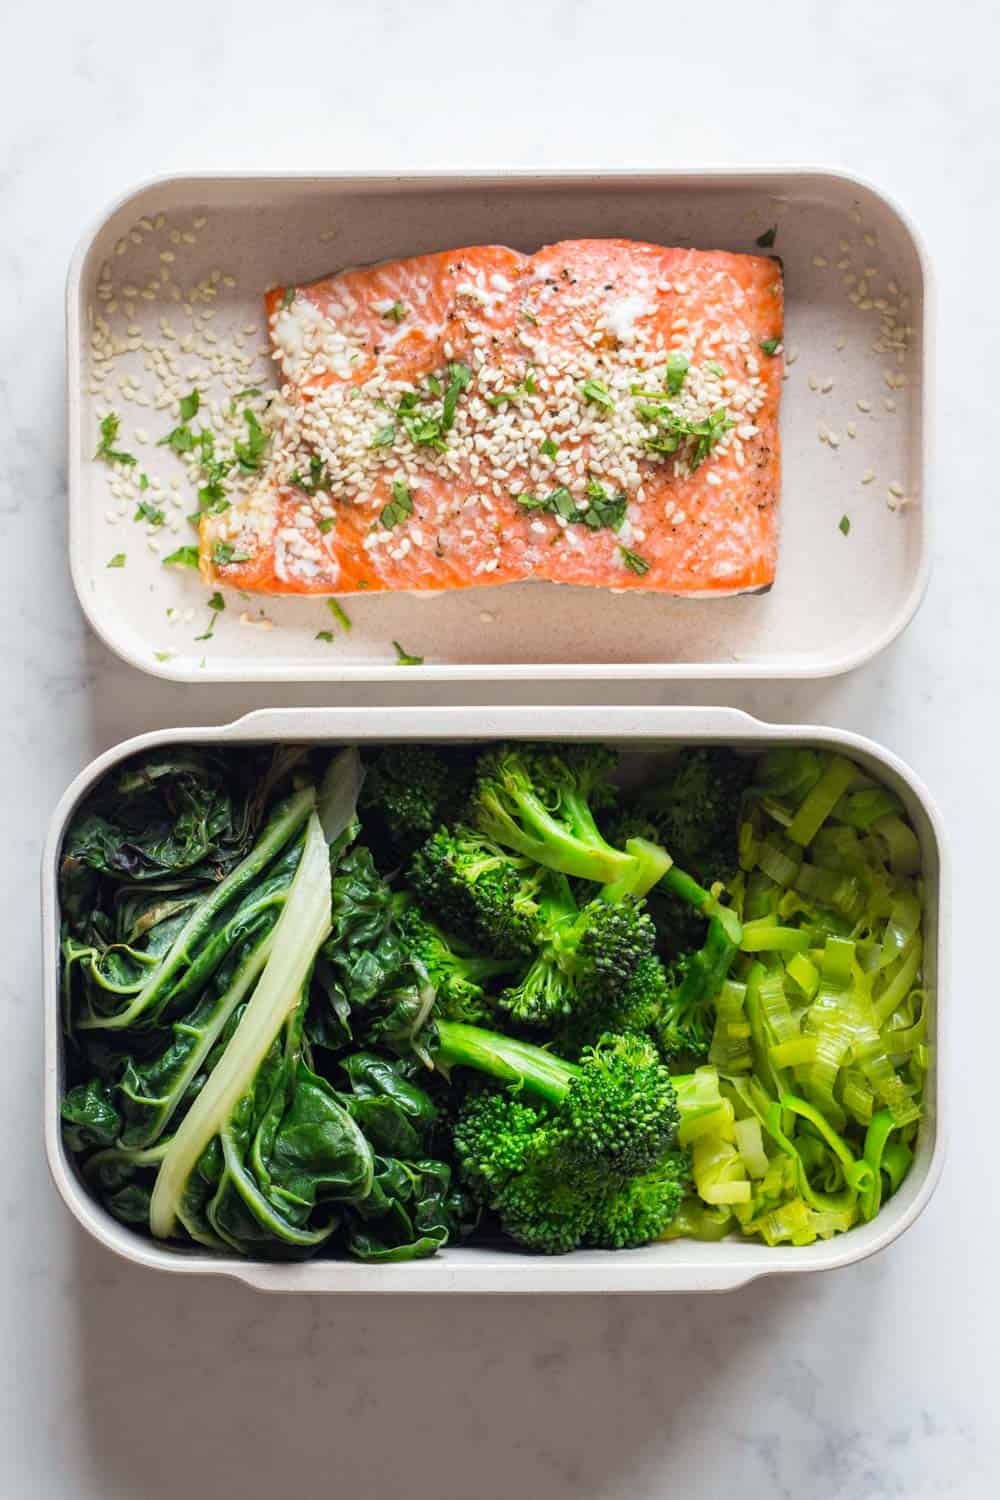 A healthy Paleo dinner for your Paleo Meal Plan - Oven-baked salmon fillet served with sautéed leek, broccoli and swiss chard.